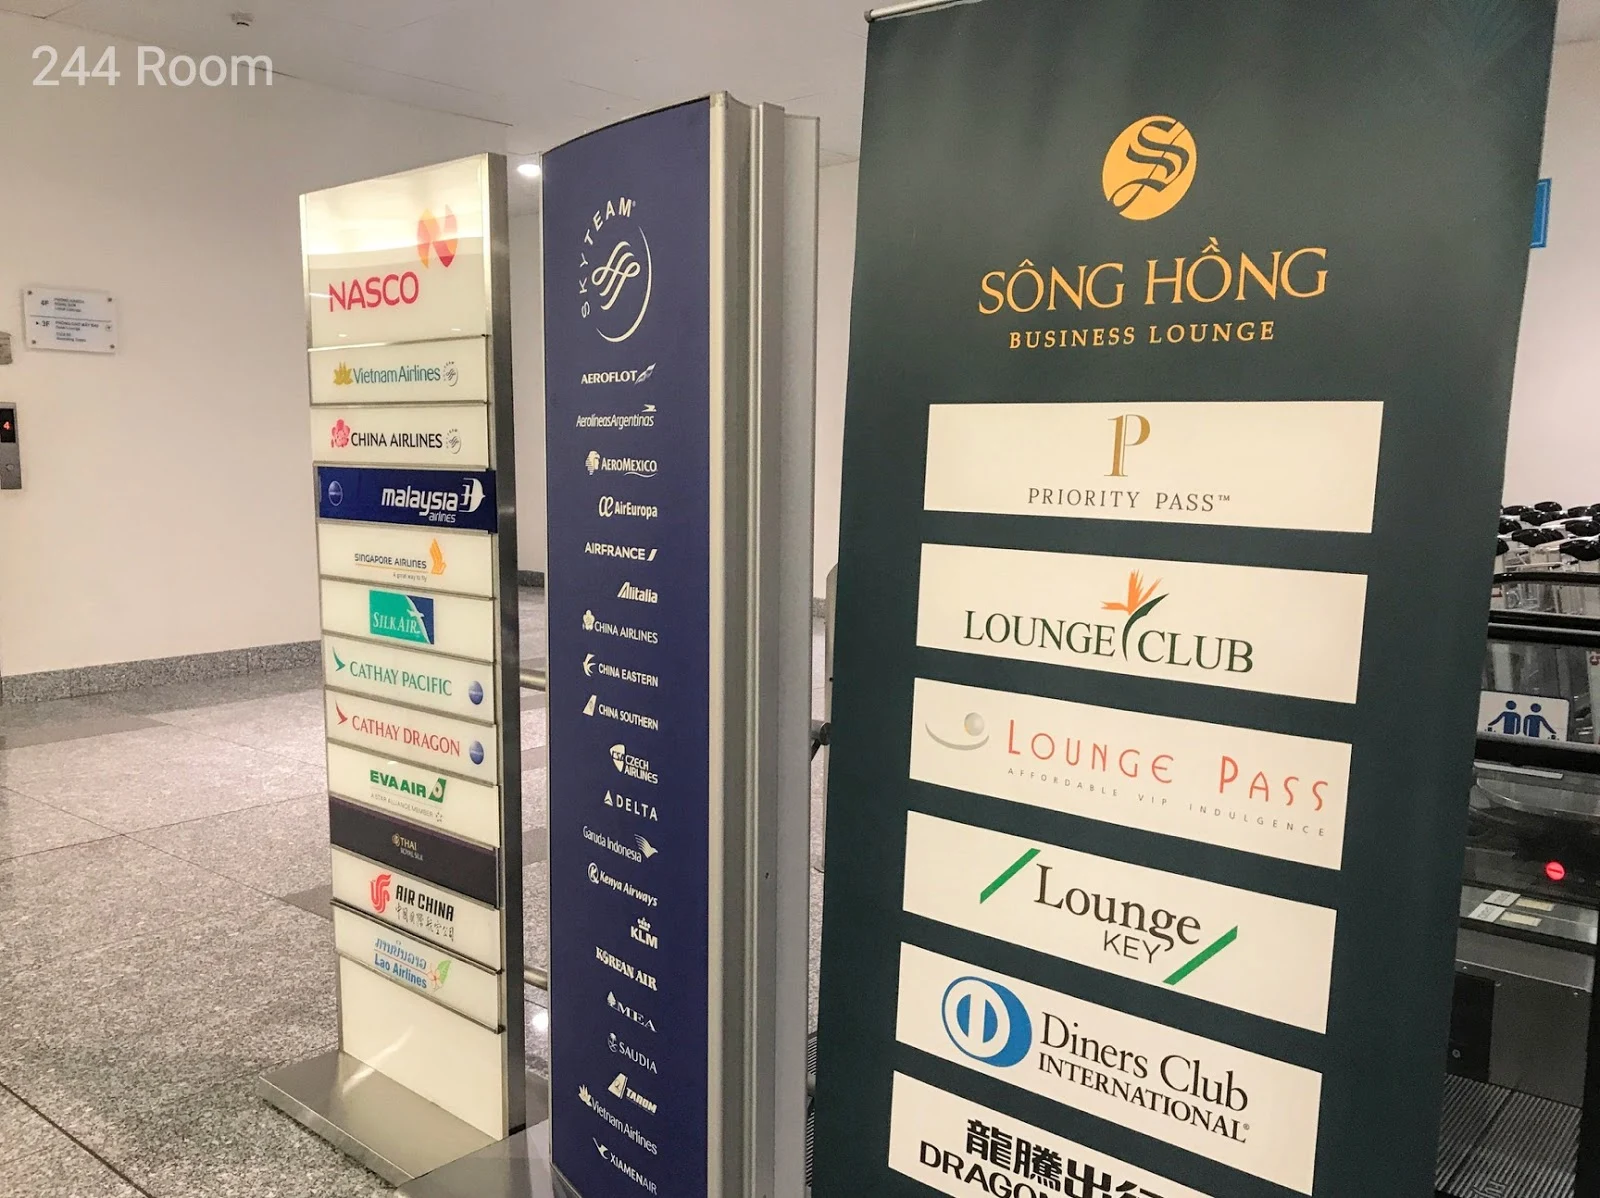 Song hong business lounge entrance2